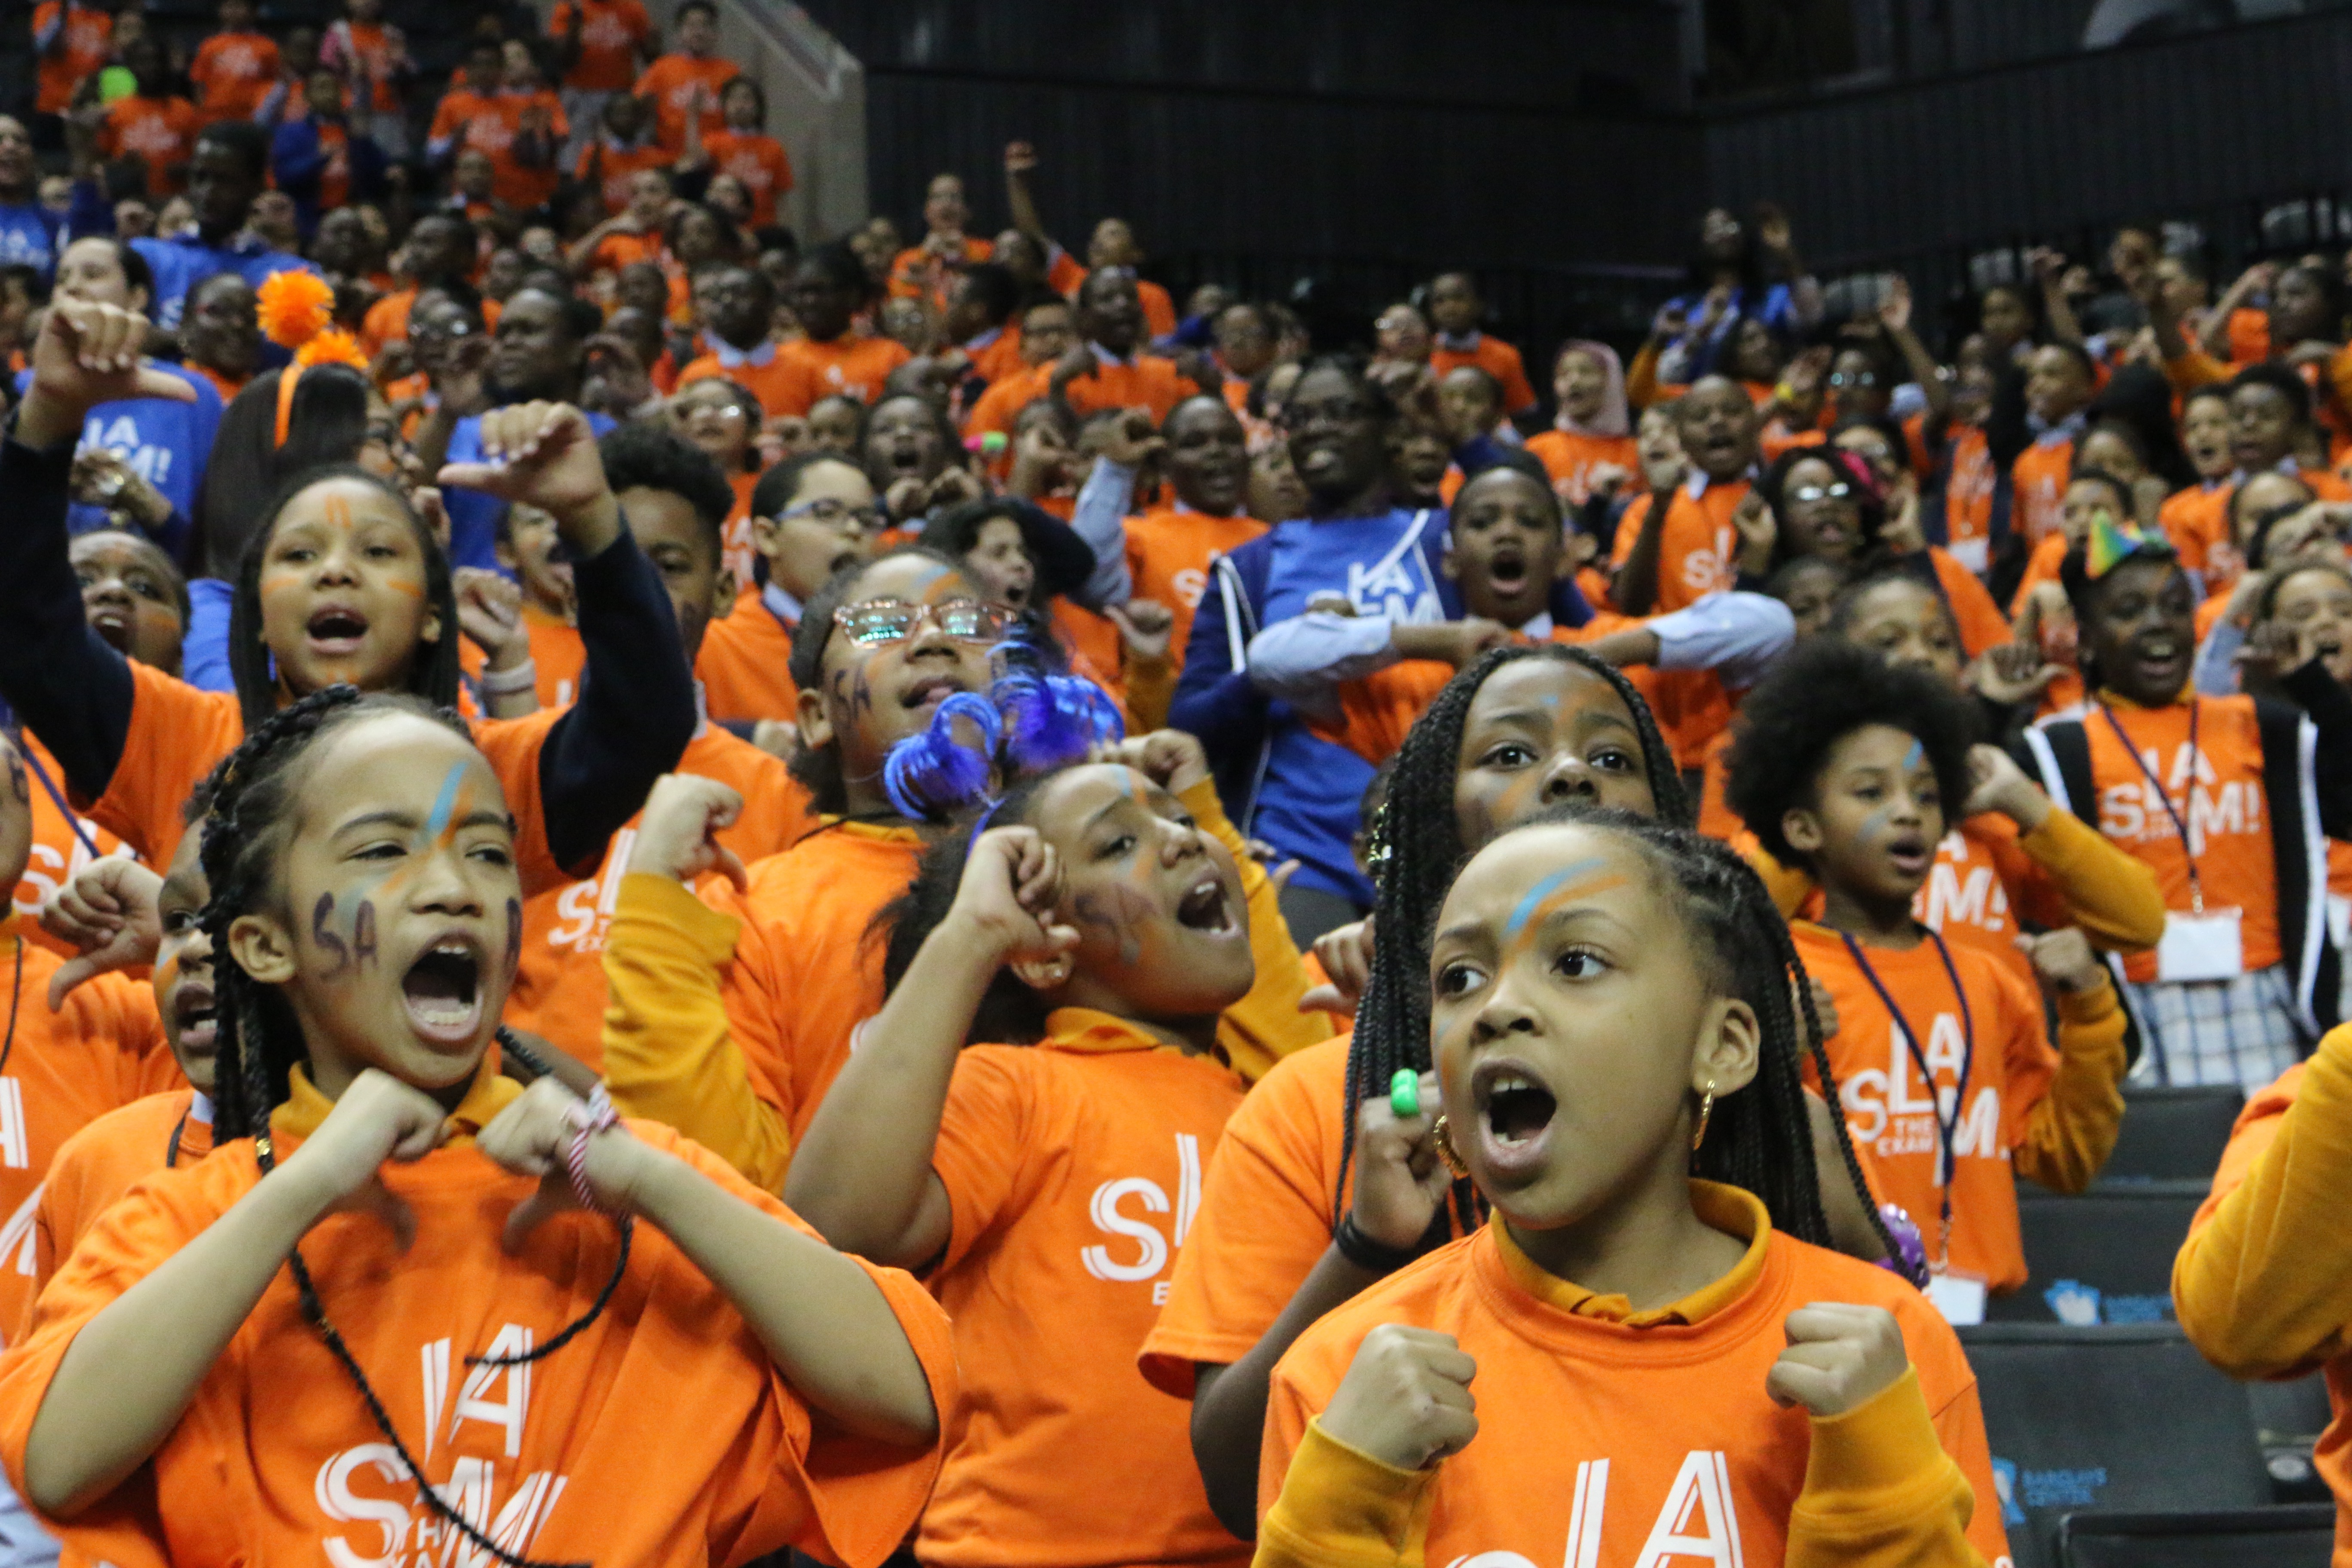 Success Academy hosts its annual "Slam the Exam" rally at the Barclays Center.